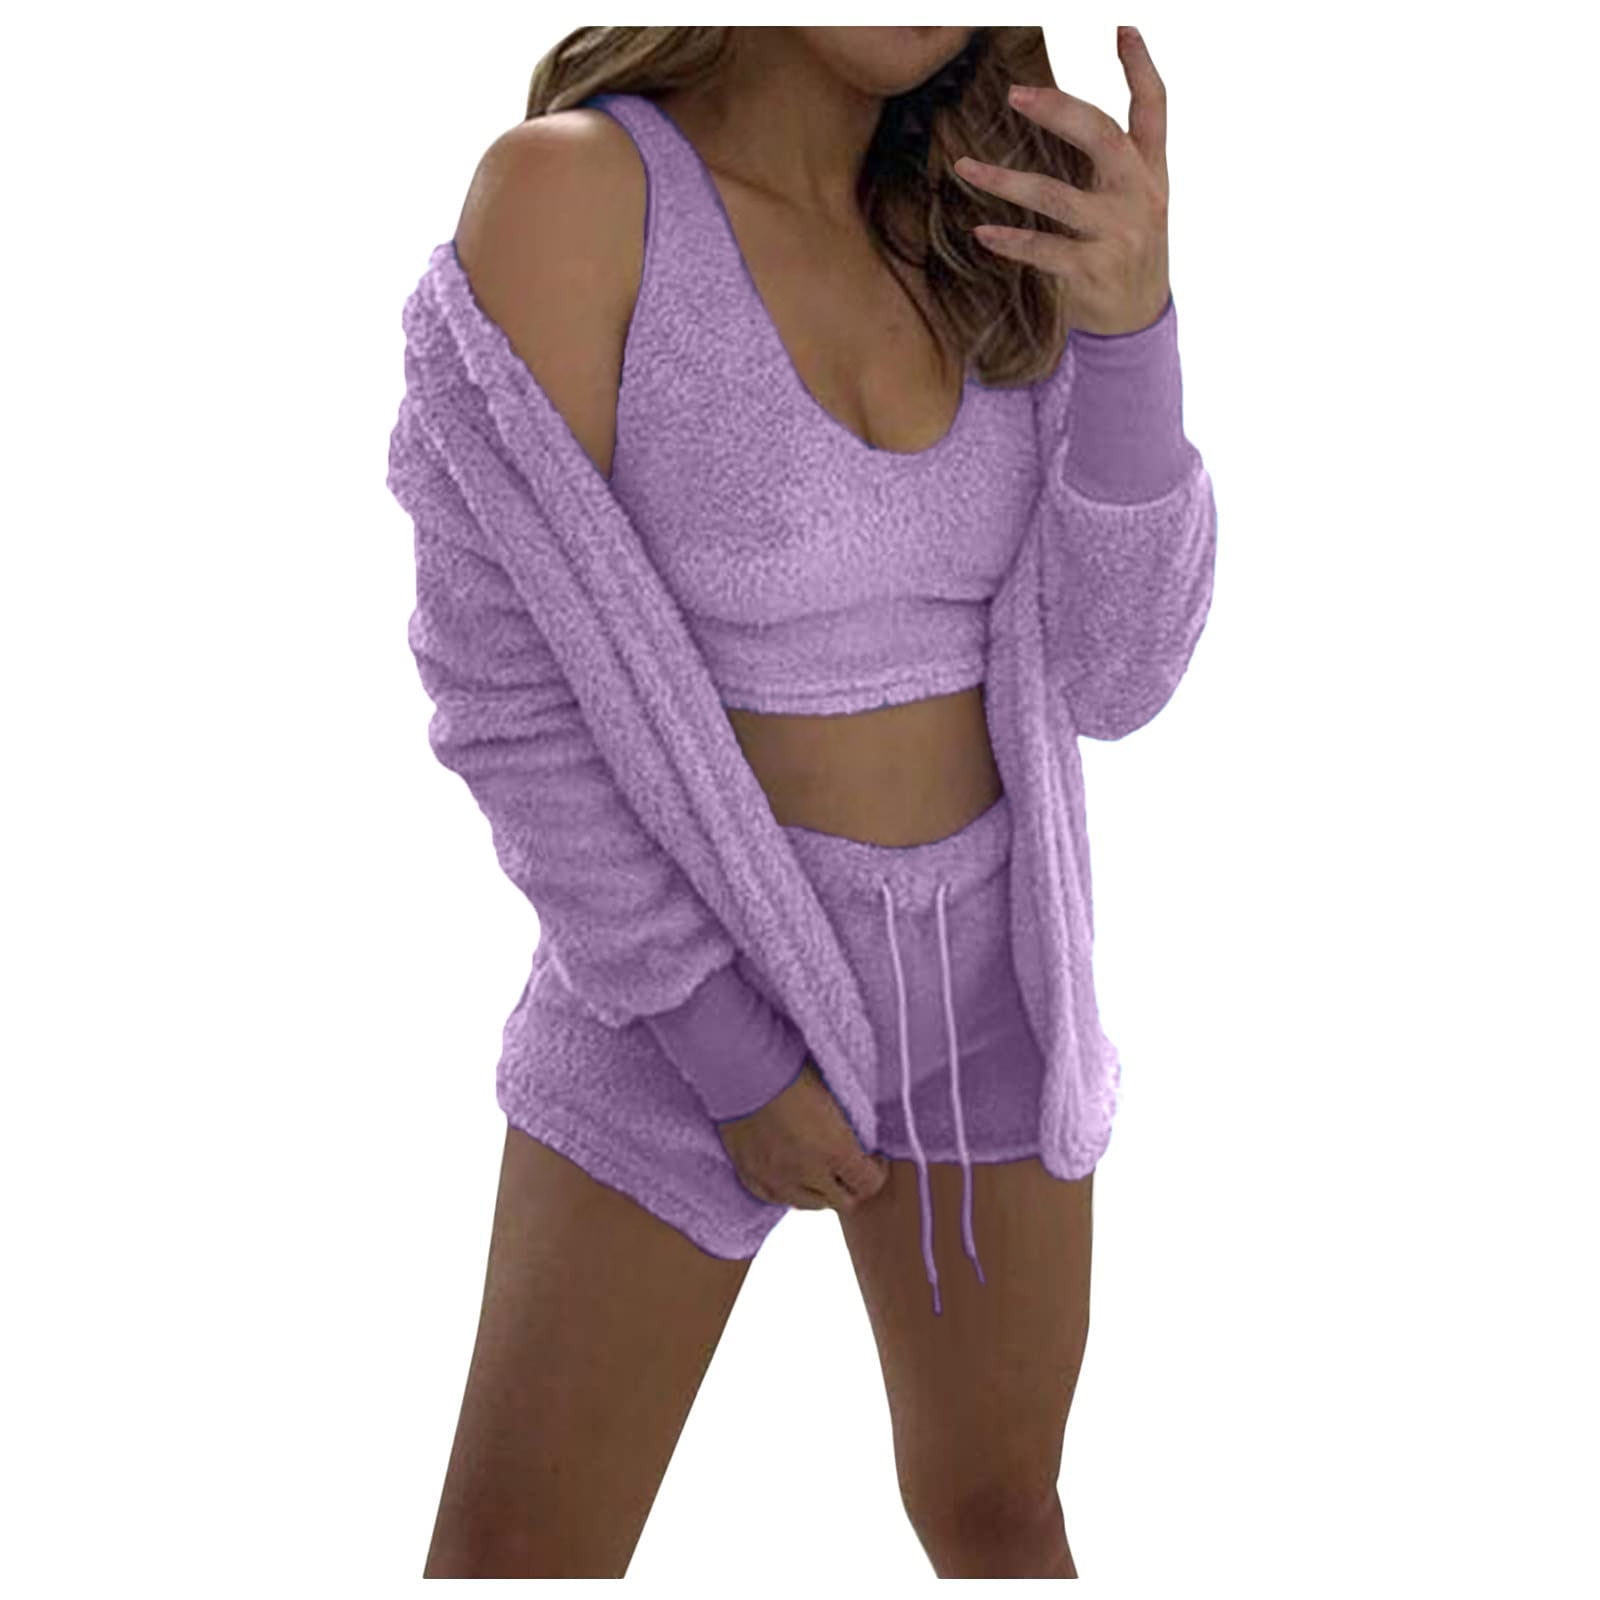 Cheibear Women's Fuzzy Fleece Soft Coat Jacket And Crop Top With Shorts  3-piece Pajamas Lounge Set Purple Xx-large : Target